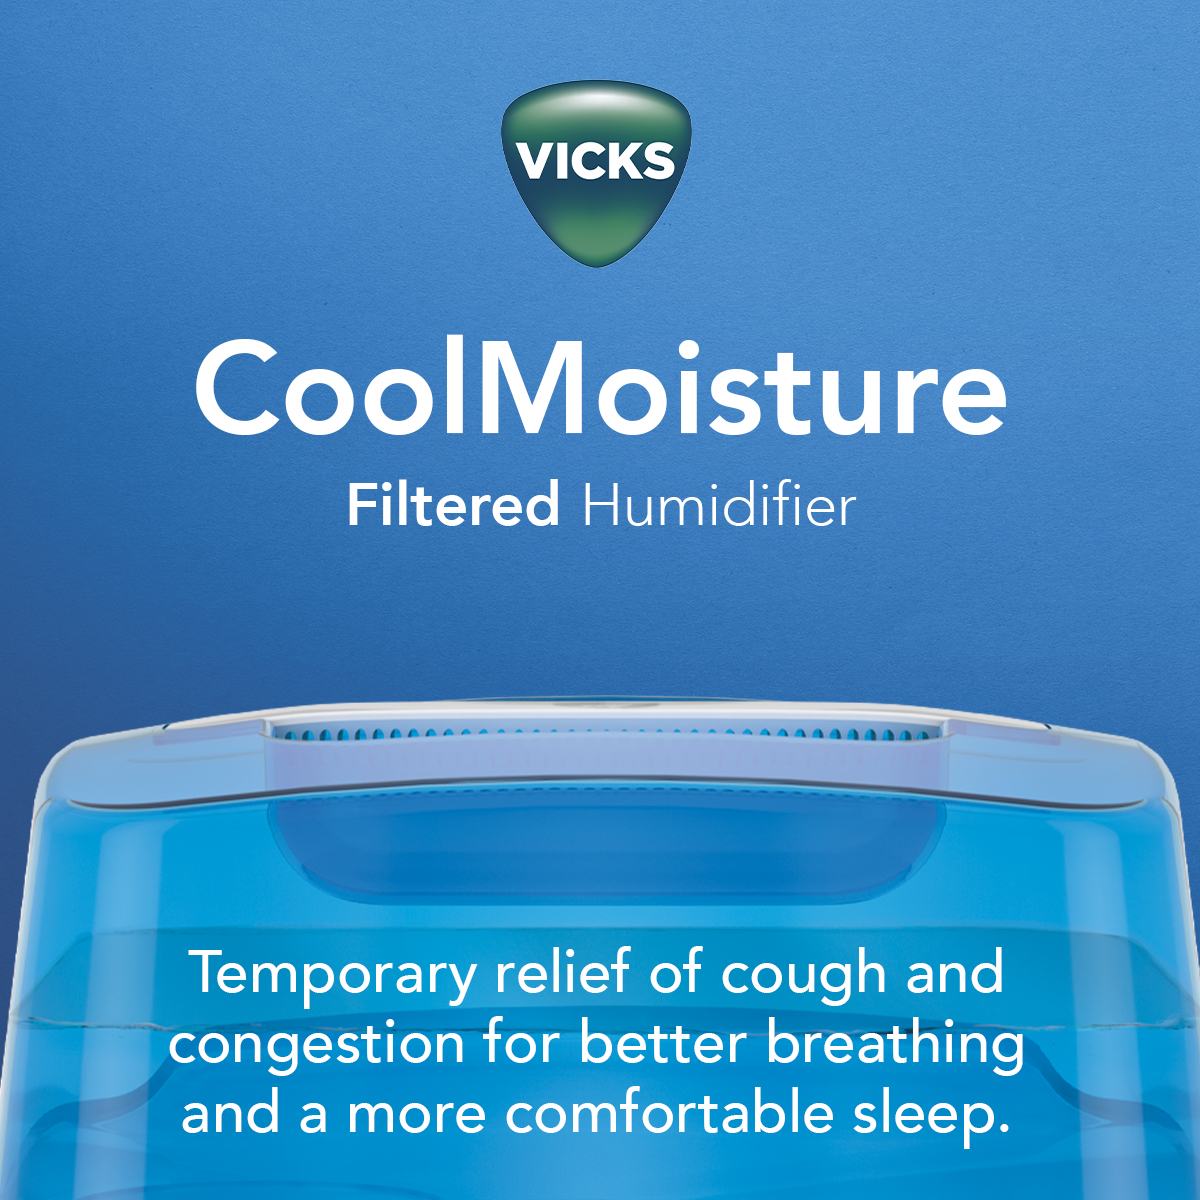 Vicks 1 gal 400 sq ft Cool Moisture Humidifier with UV Technology, V3900, Blue/White - image 3 of 12